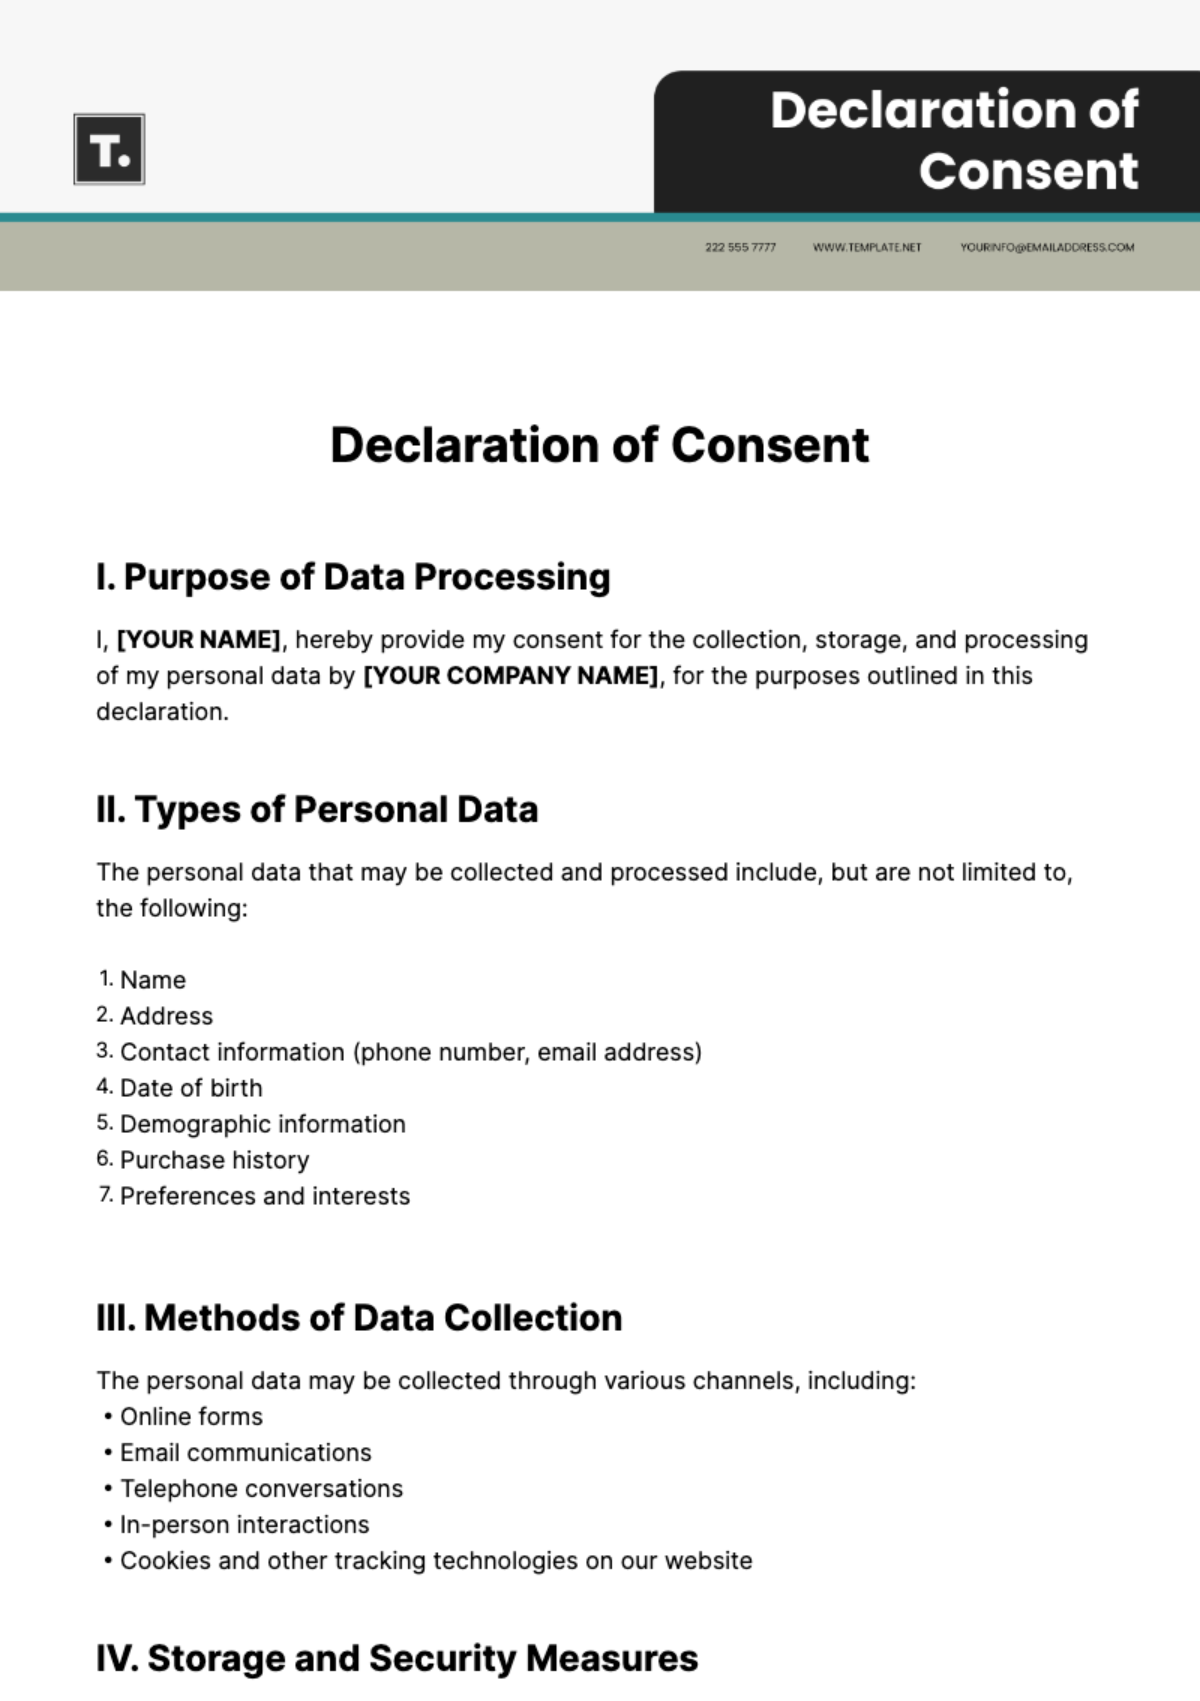 Free Declaration of Consent Template